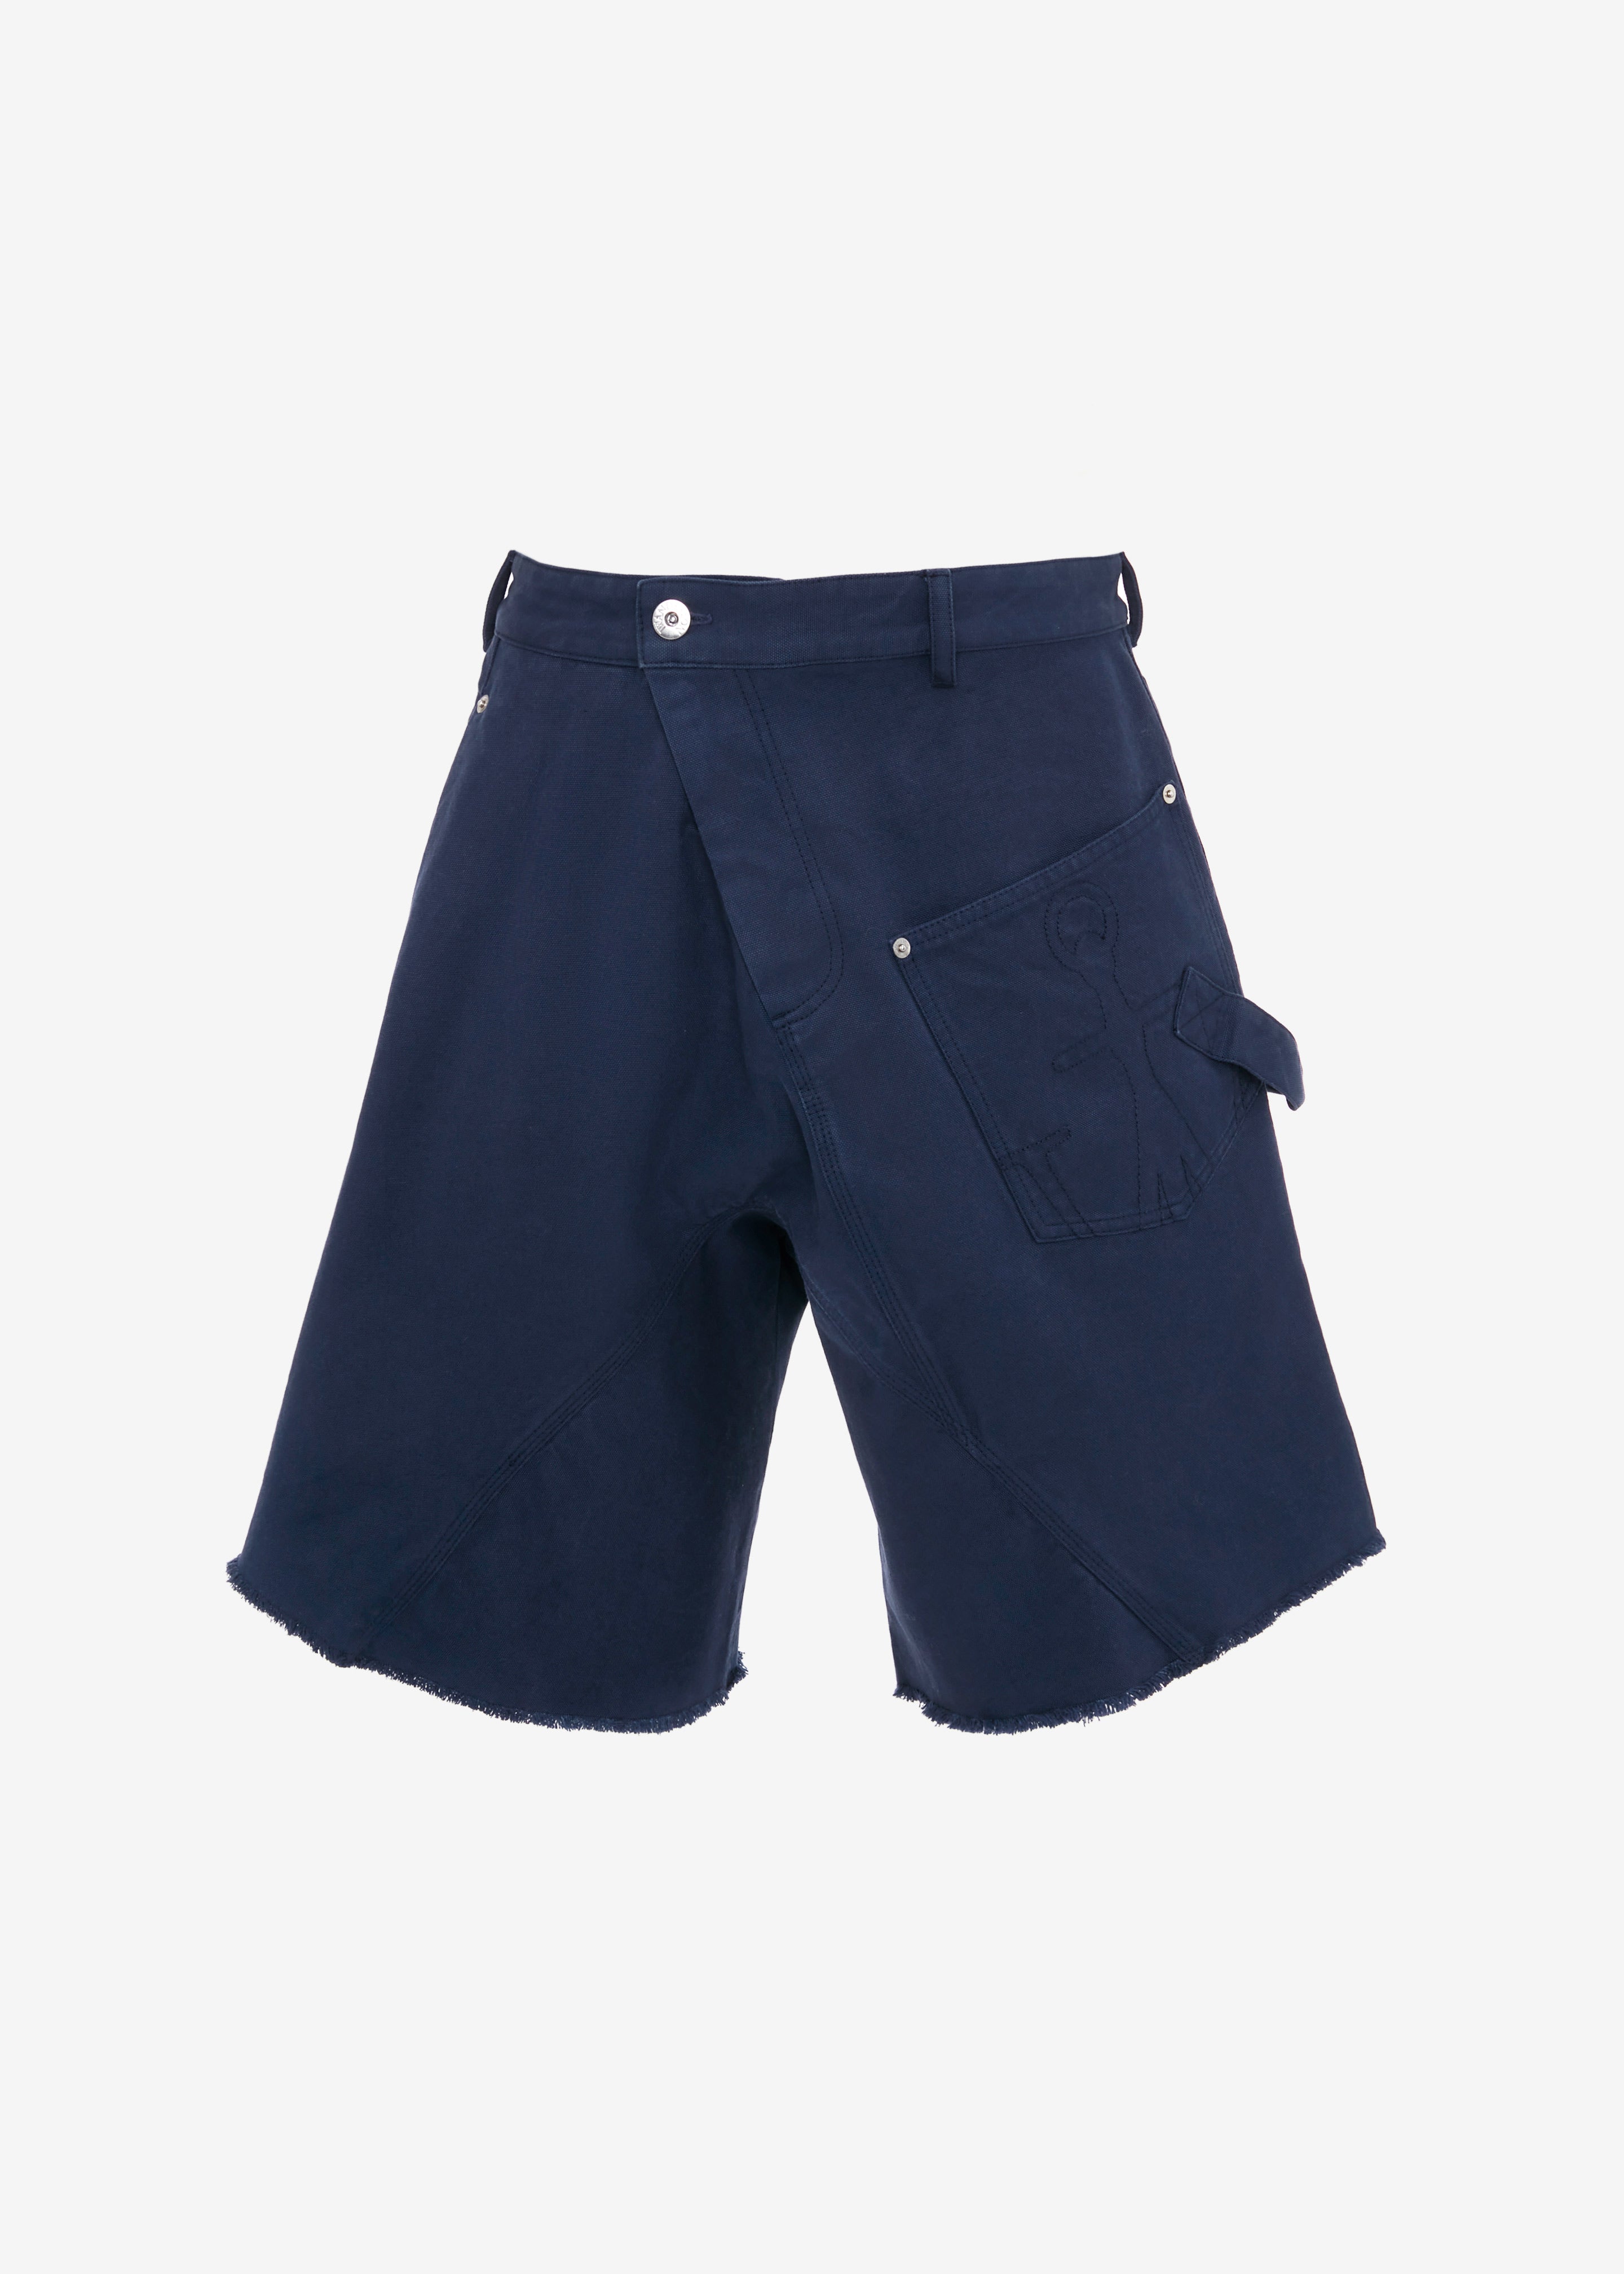 JW Anderson Twisted Shorts - Navy - 9